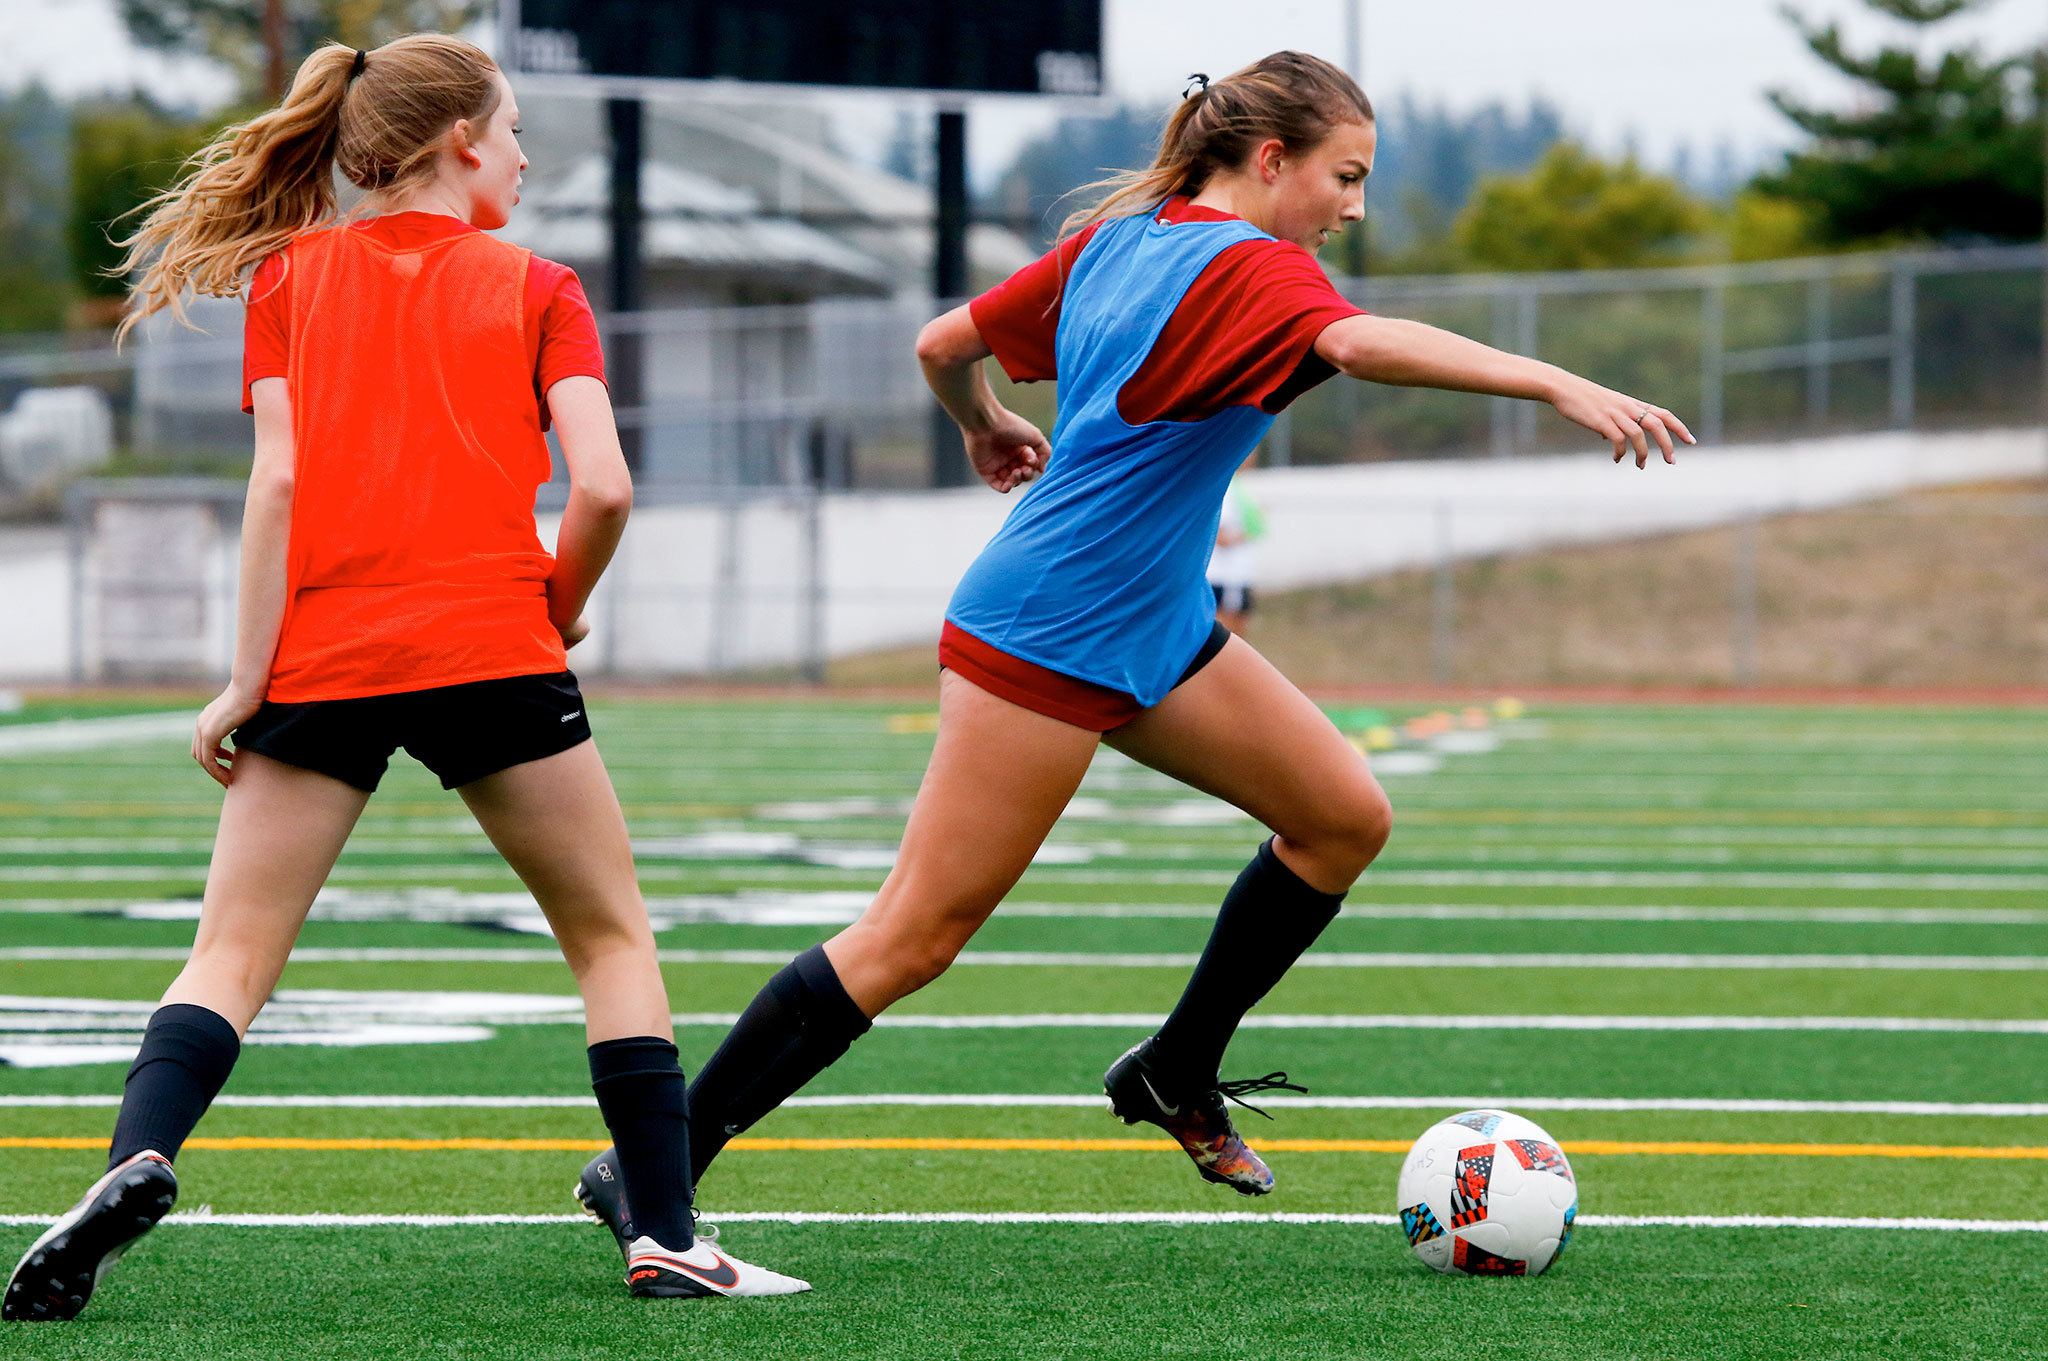 Snohomish midfielder Anna Montemor (right) dribbles past a teammate during practice on Sept. 5. (Andy Bronson / The Herald)